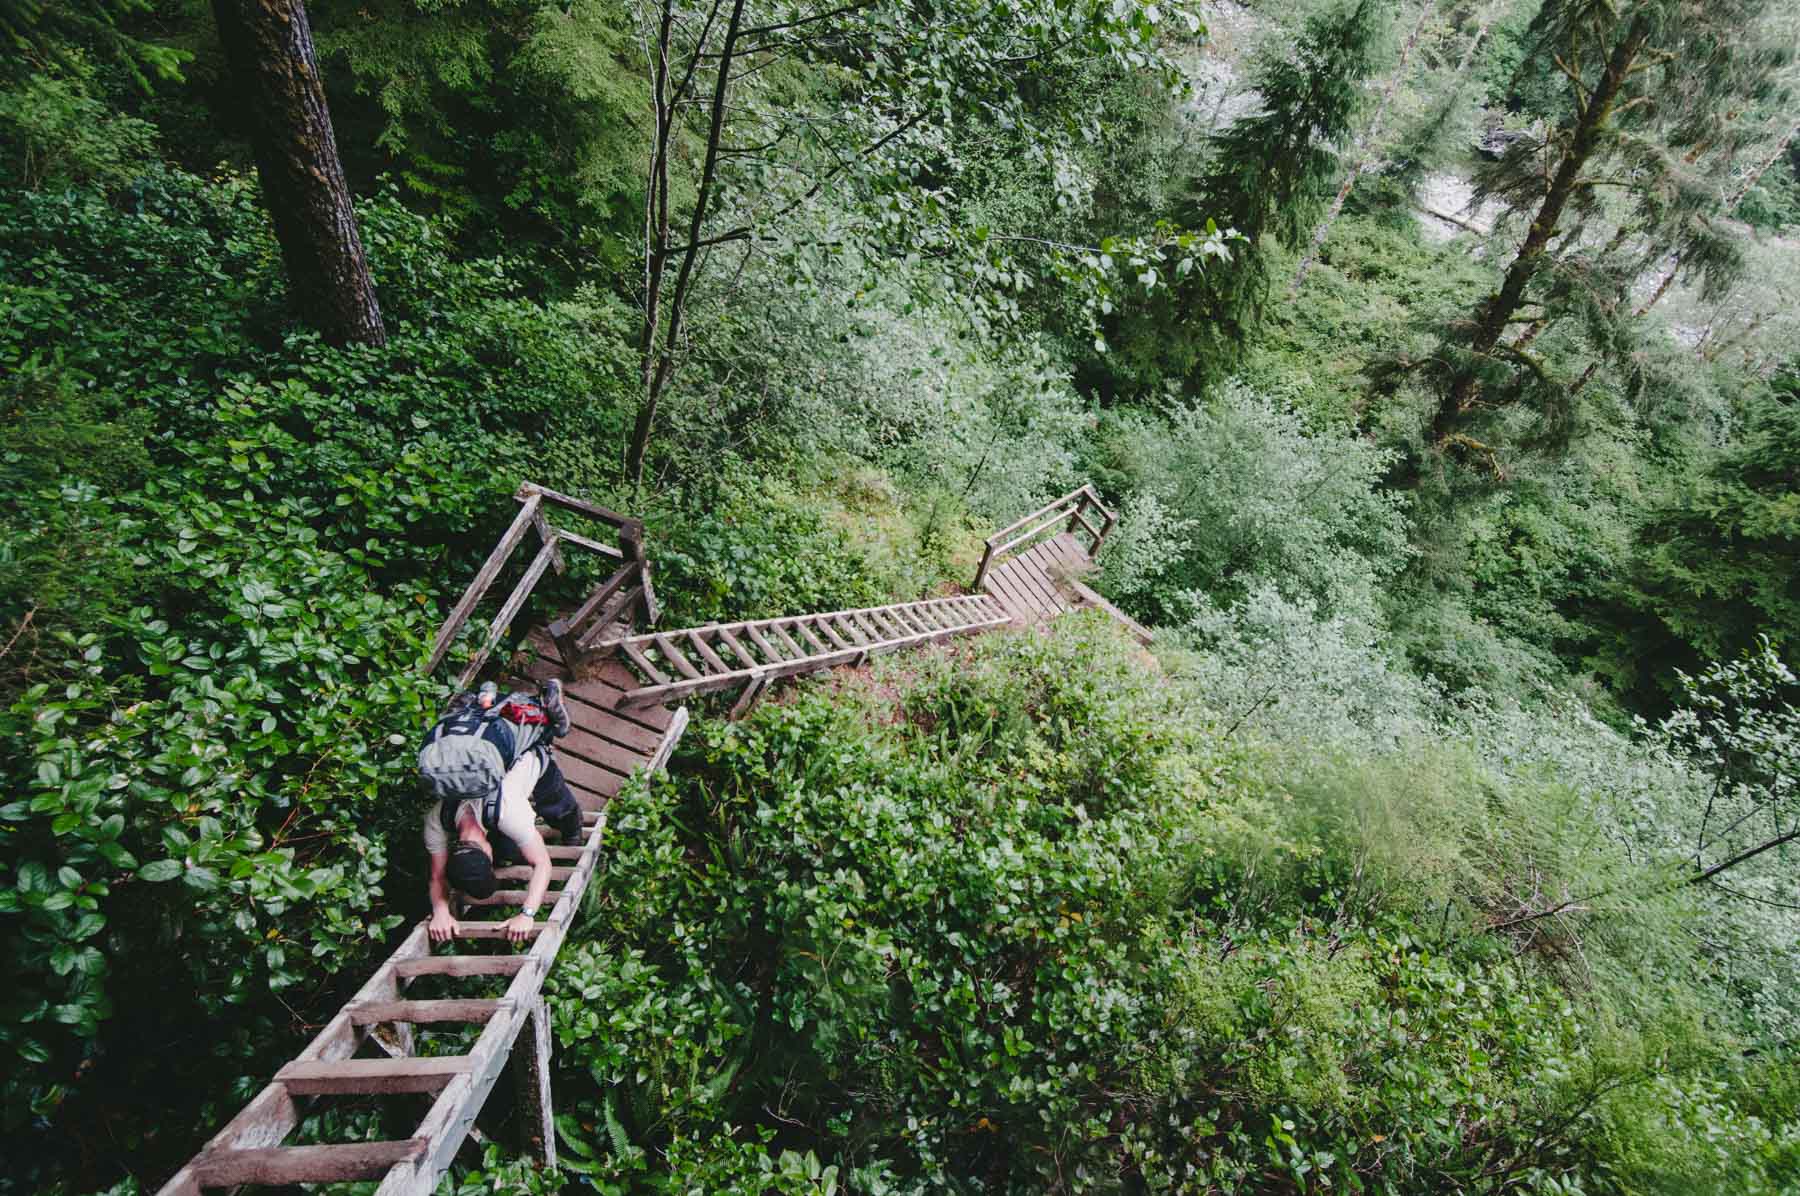 Descending steep ravines on one of the WCT's endless ladders